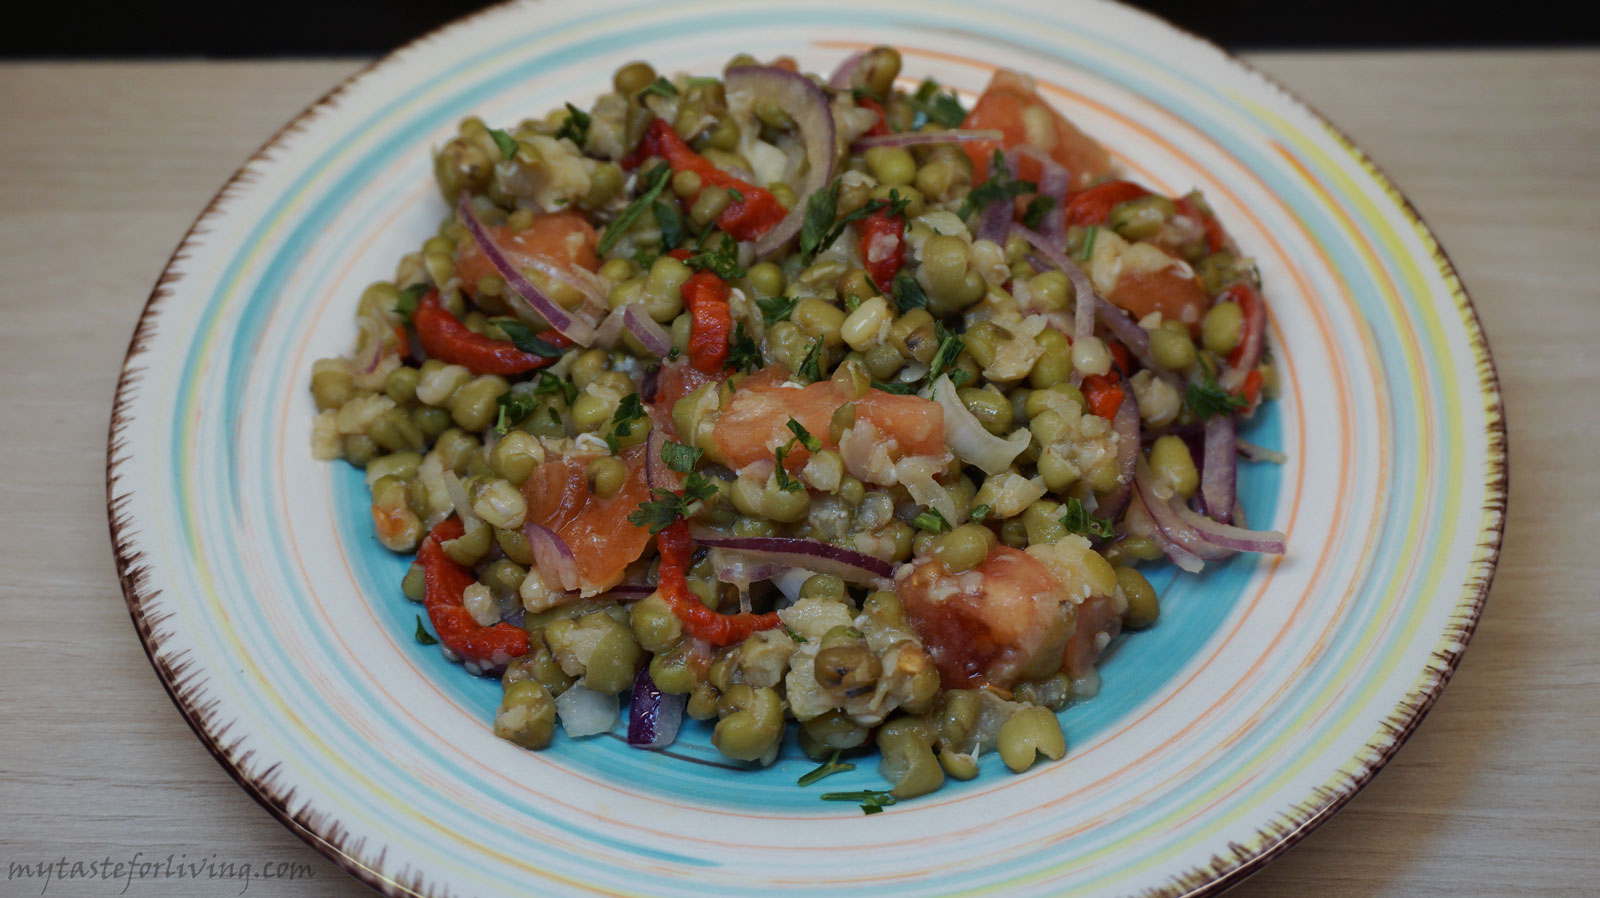 I offer you a fresh suggestion for a recipe with mung bean.